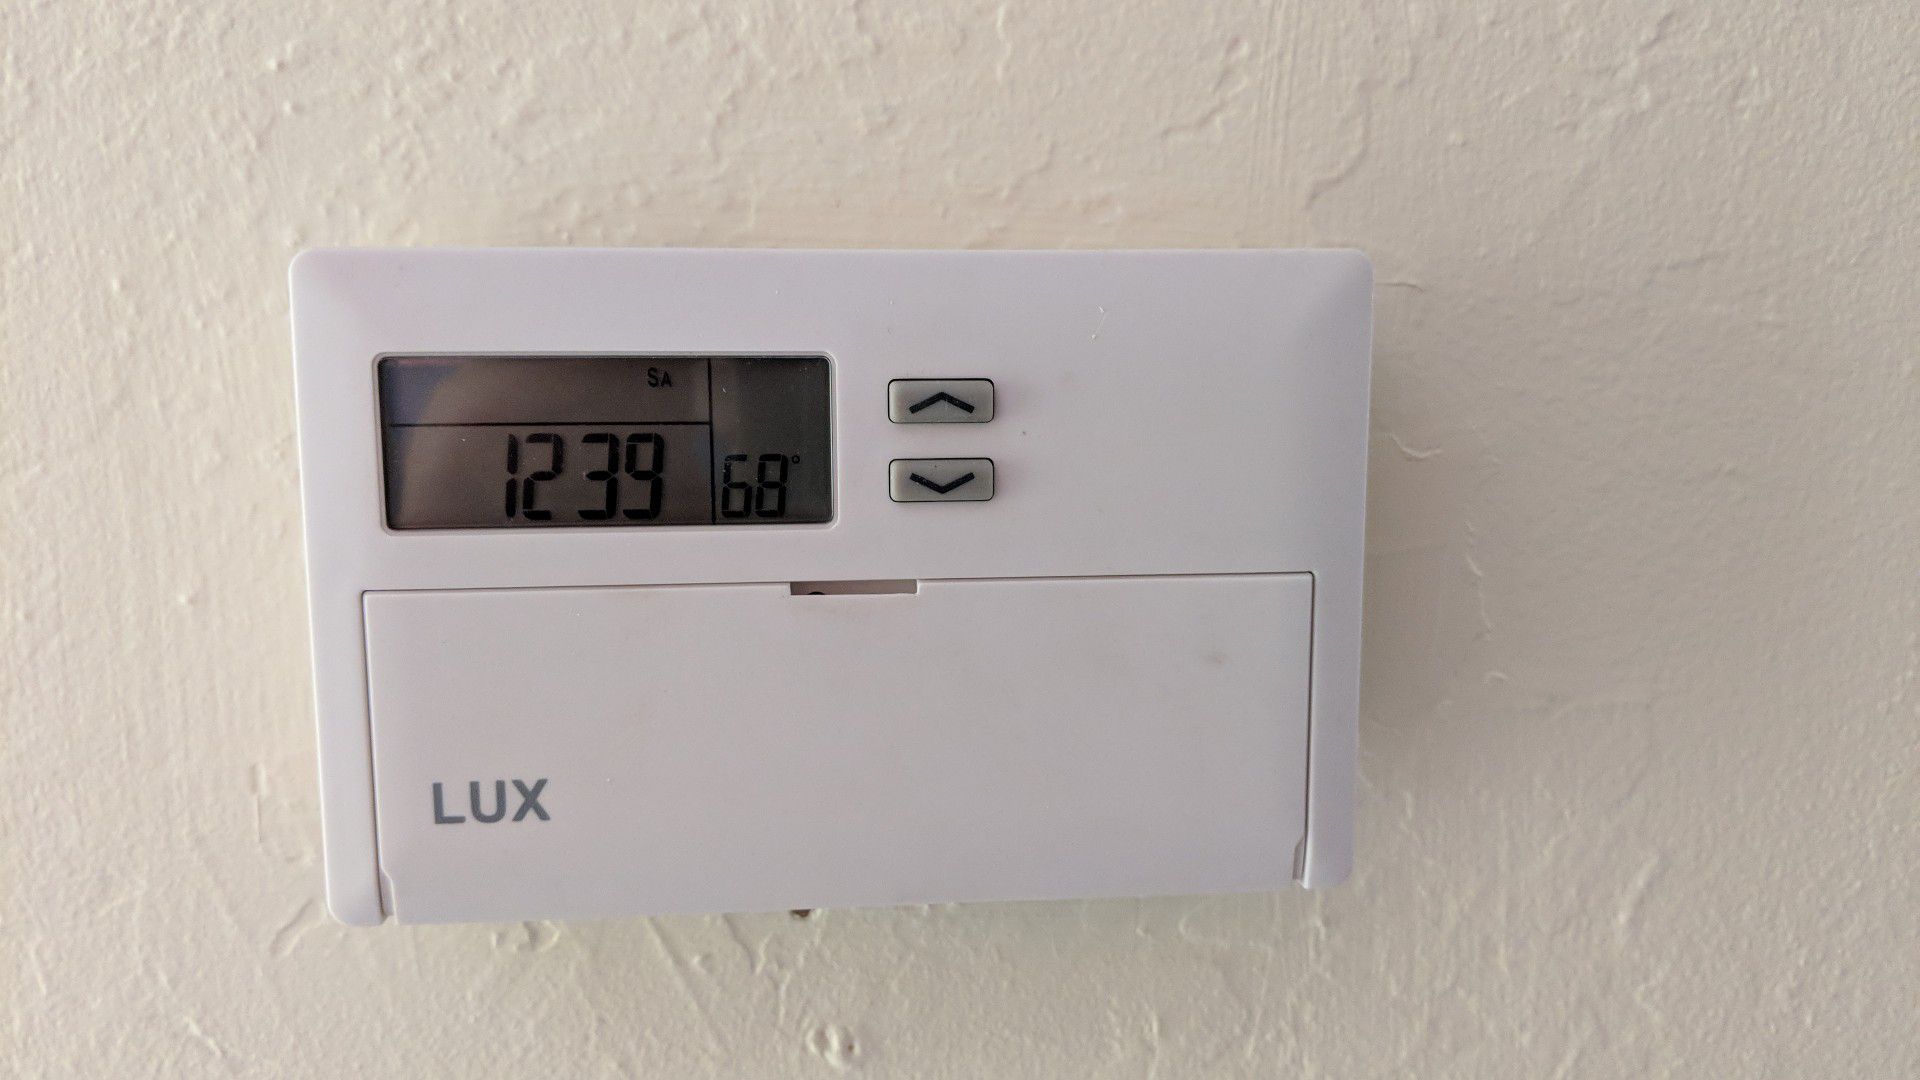 7 day programmable thermostat with filter reminder Lux TX500E